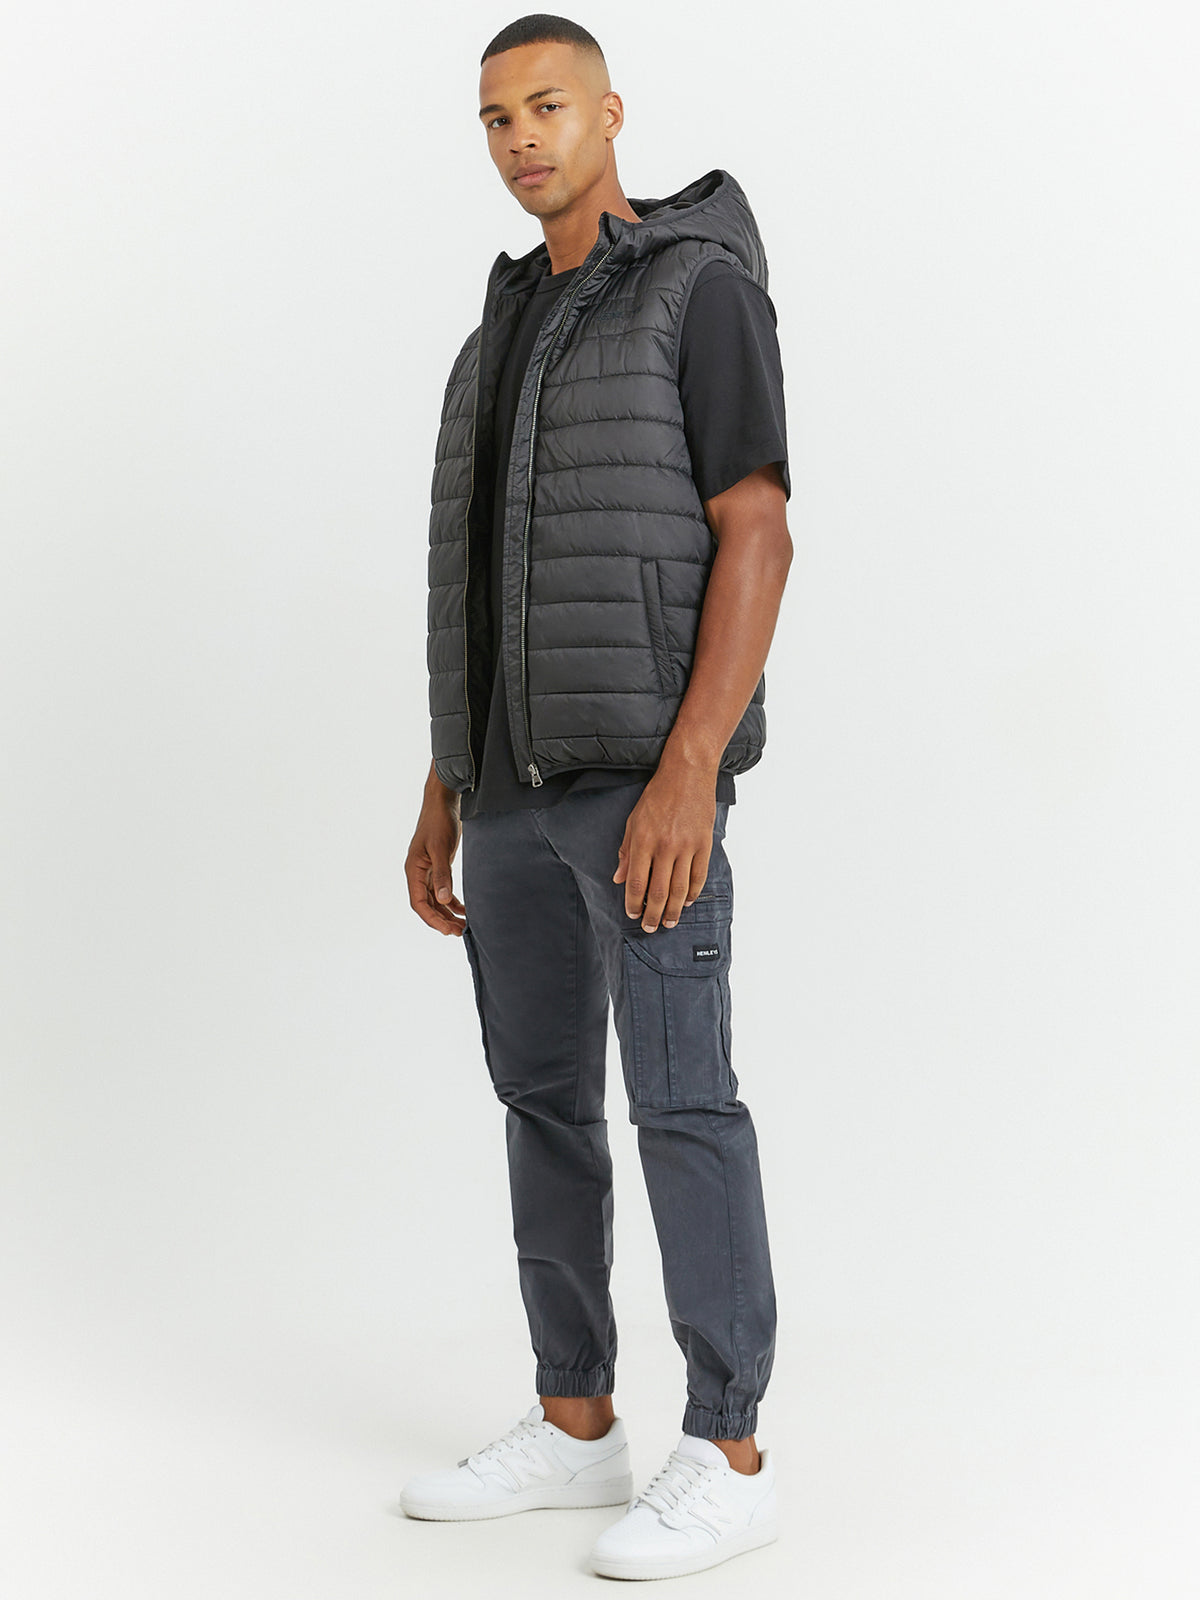 Velocity Hooded Gillet